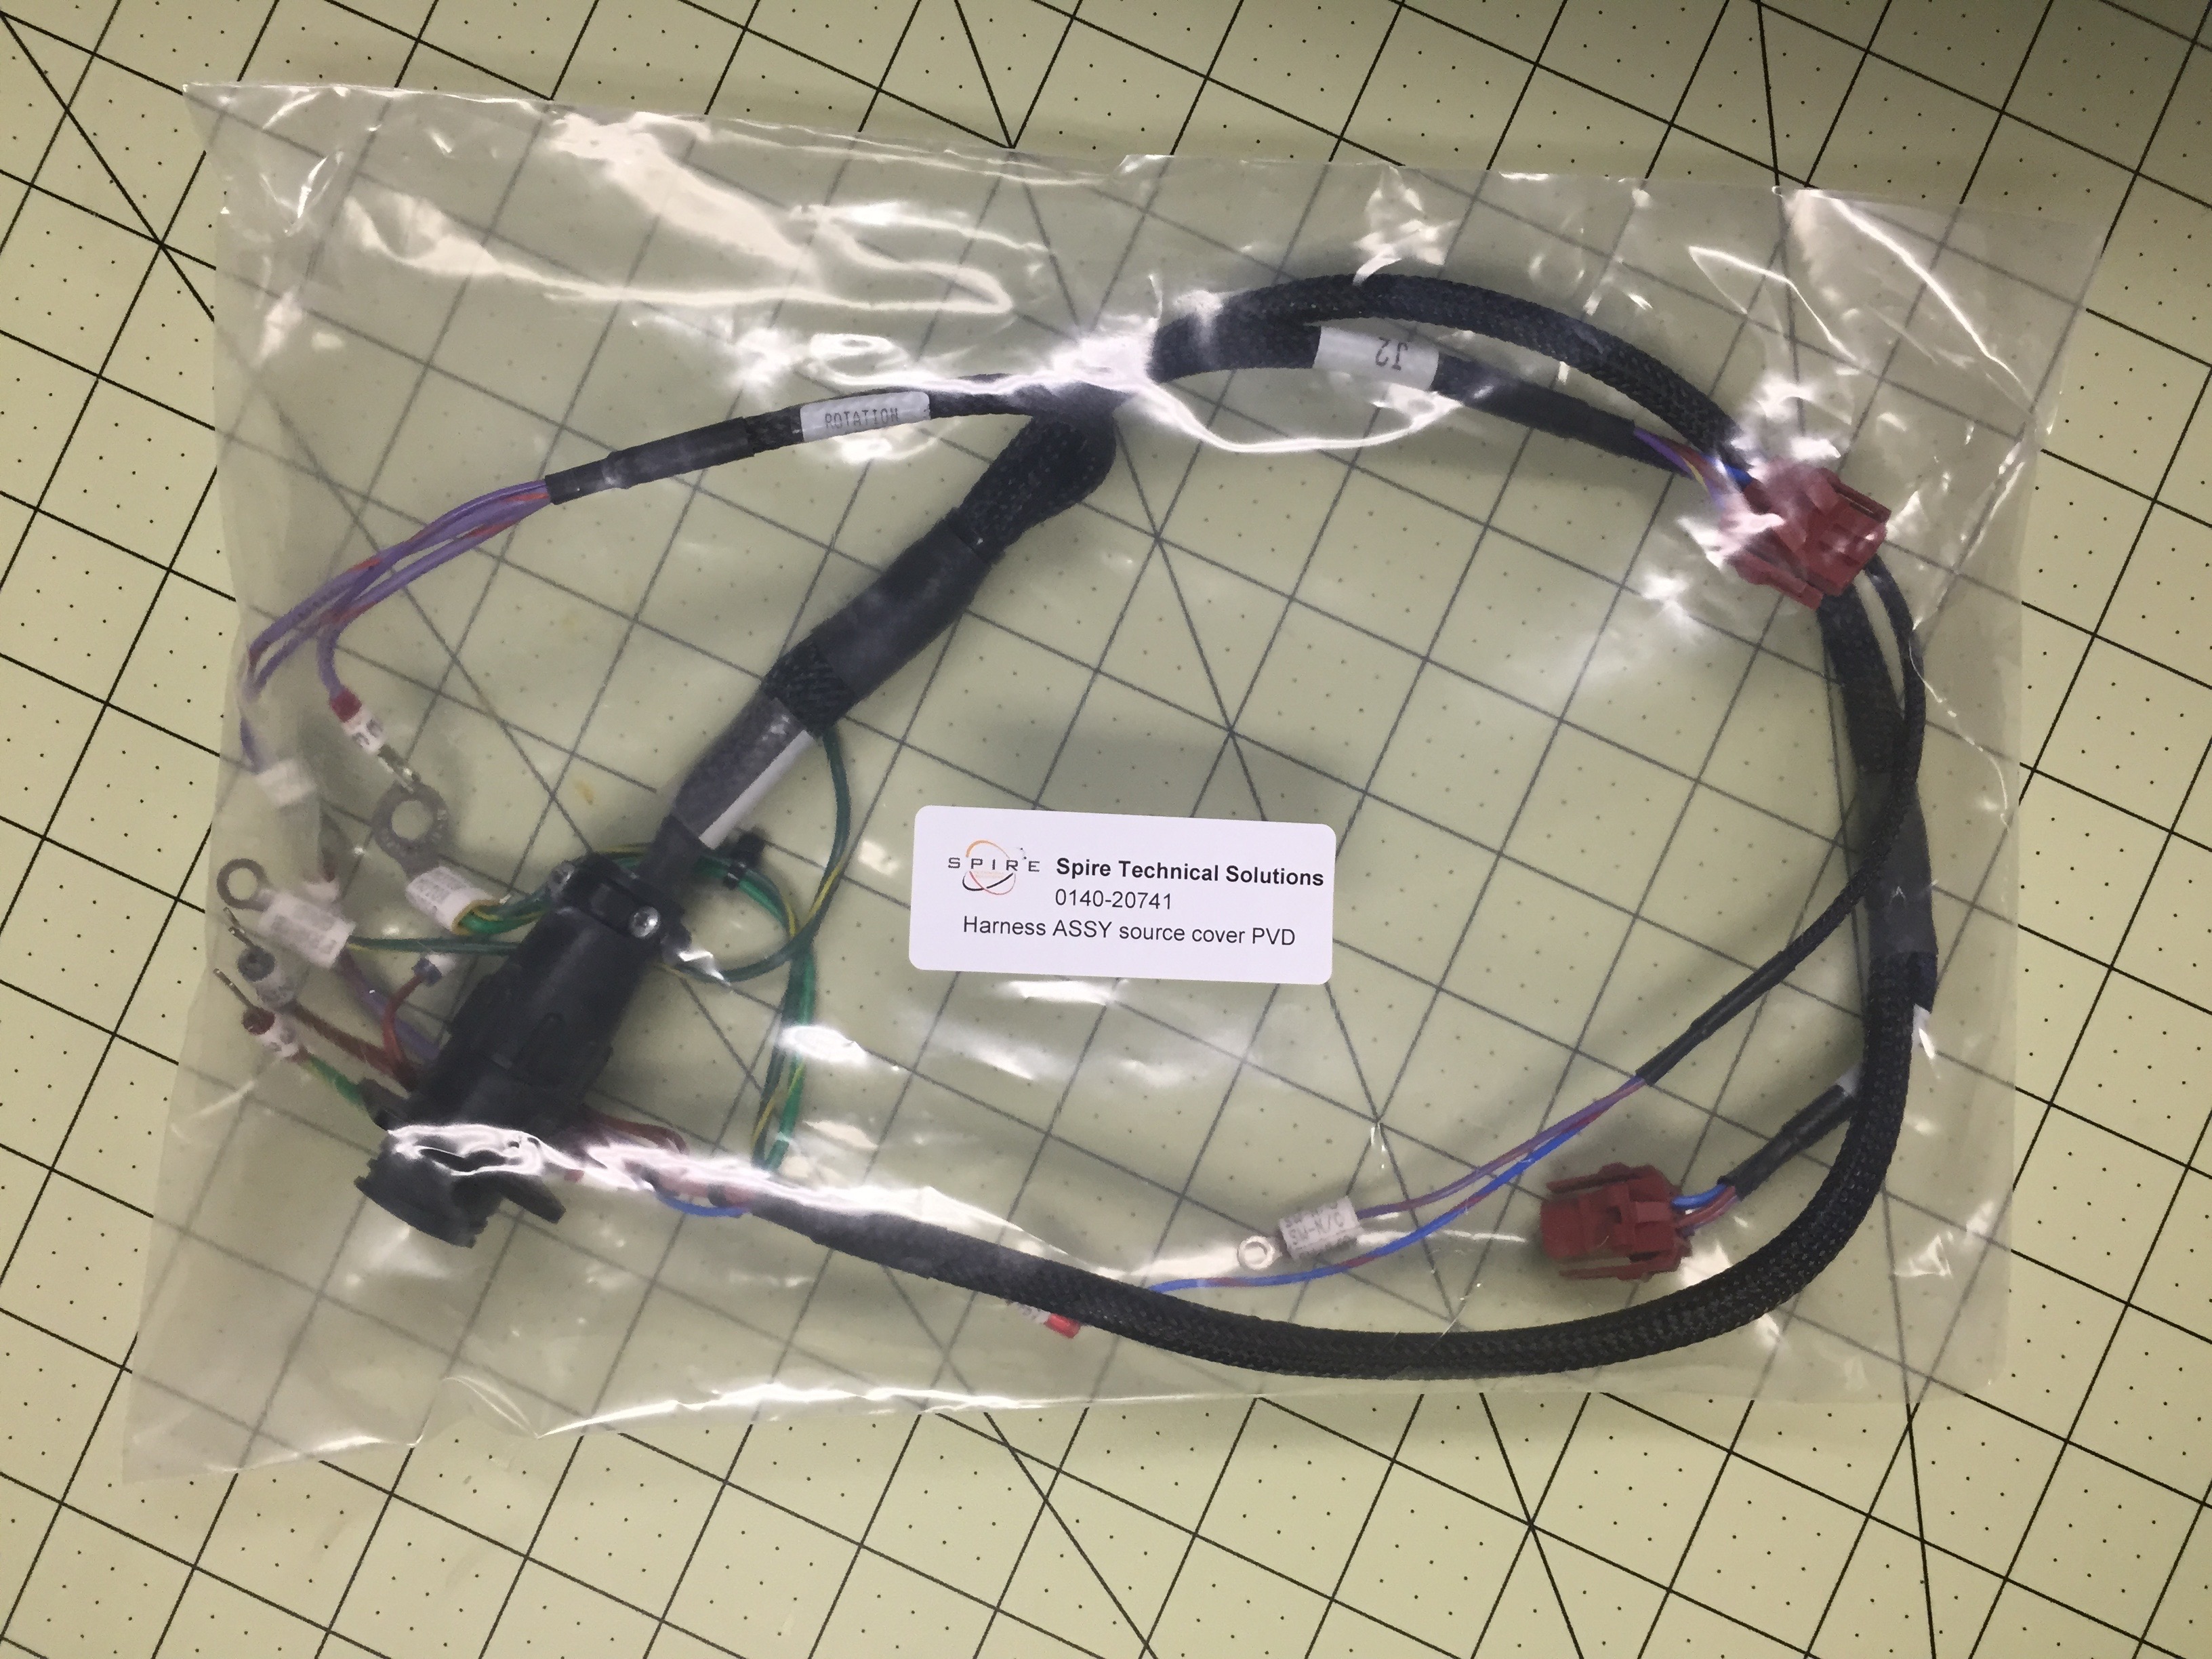 Harness ASSY source cover PVD 